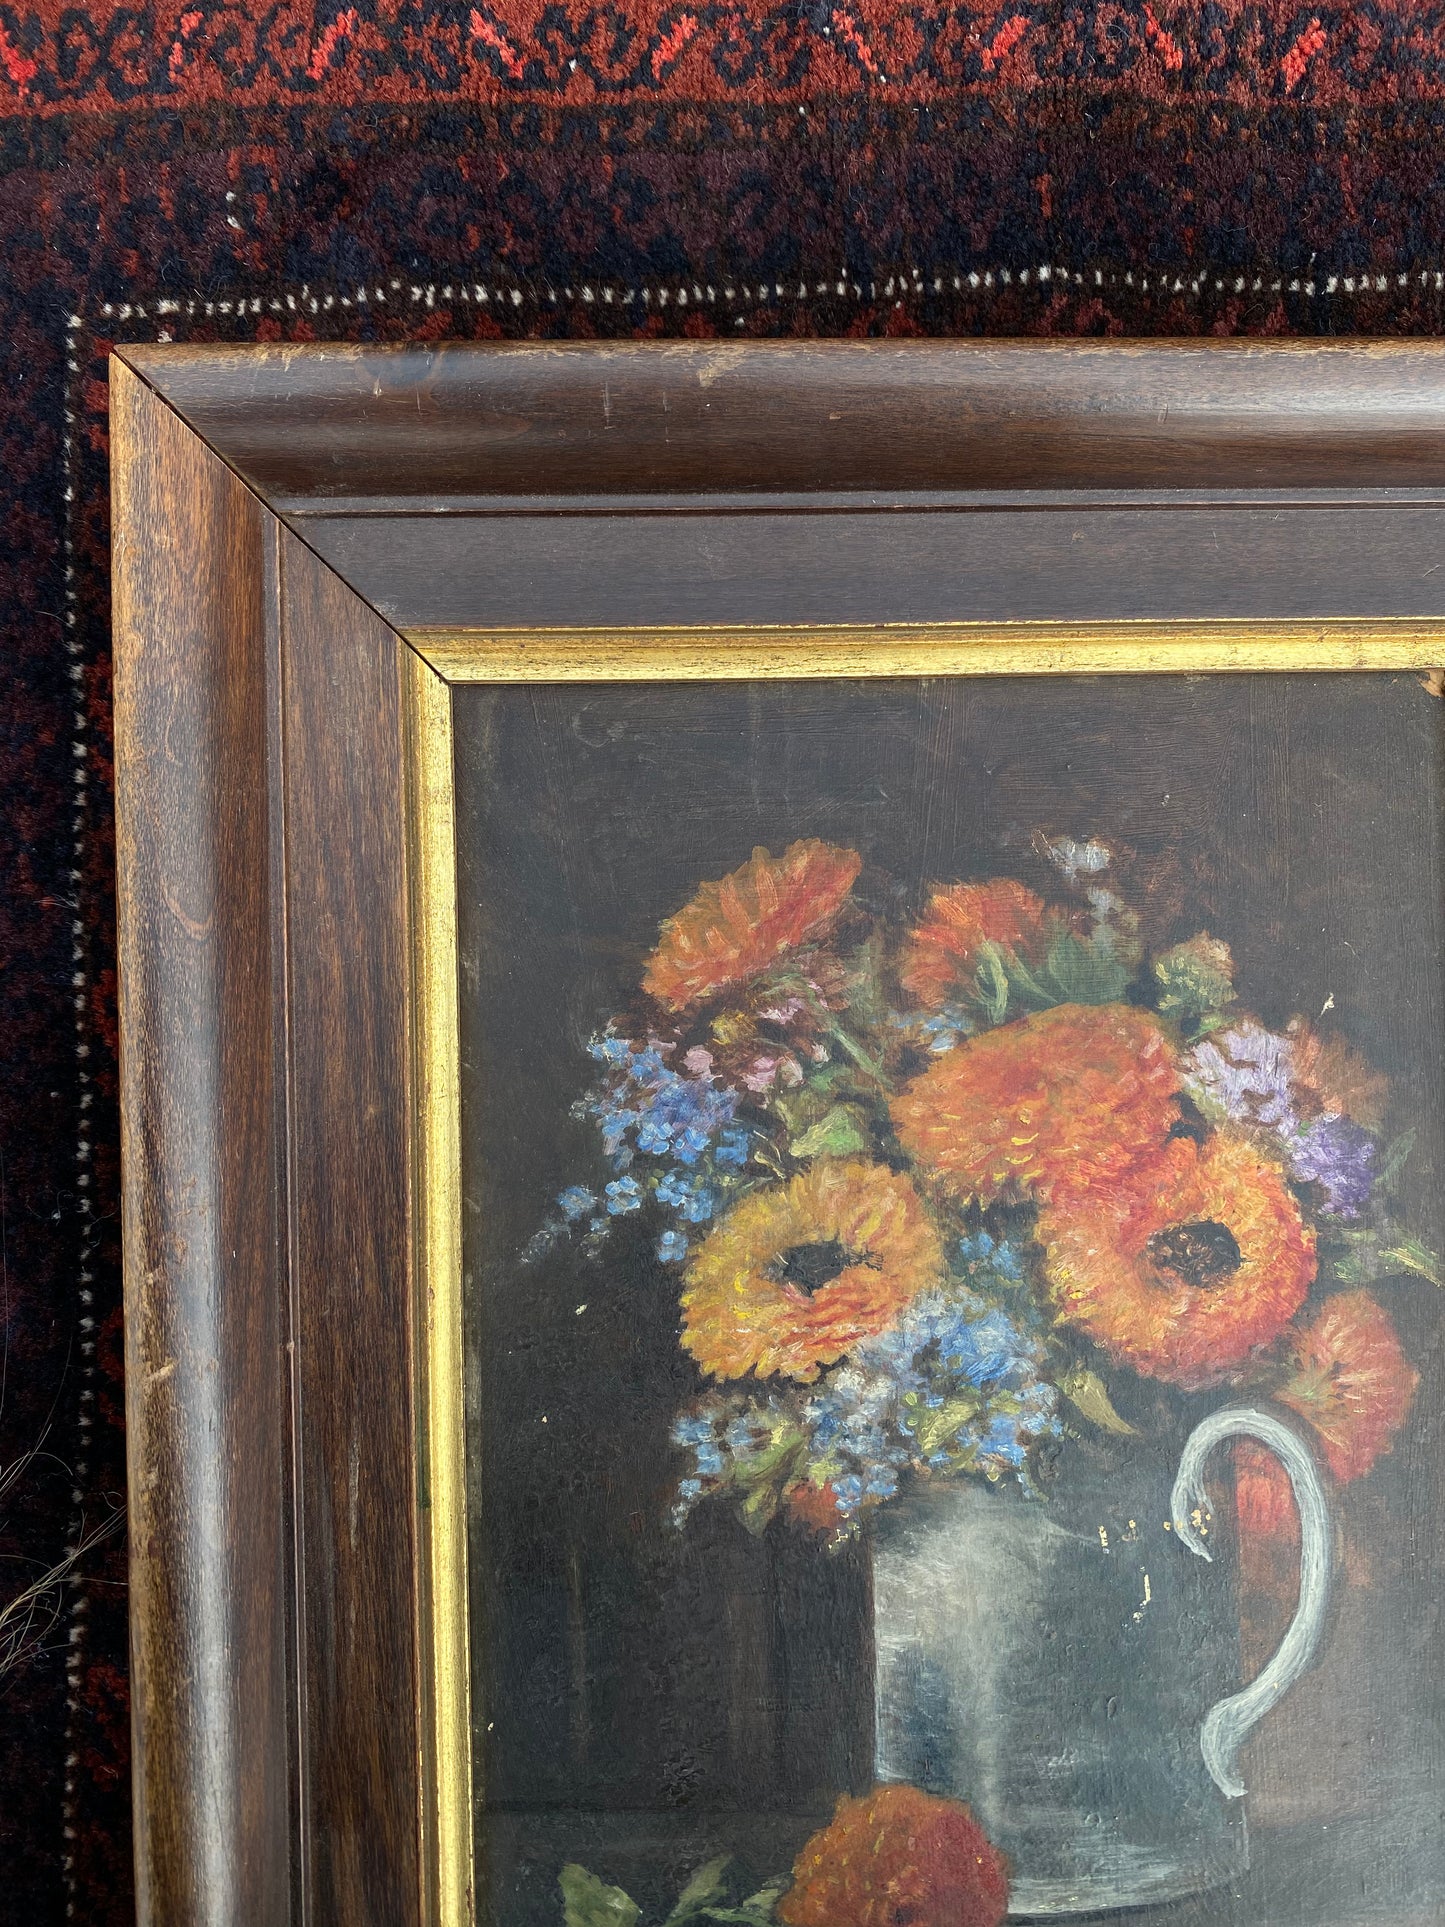 Antique 1920s Floral Oil Painting on Board- 12x16”